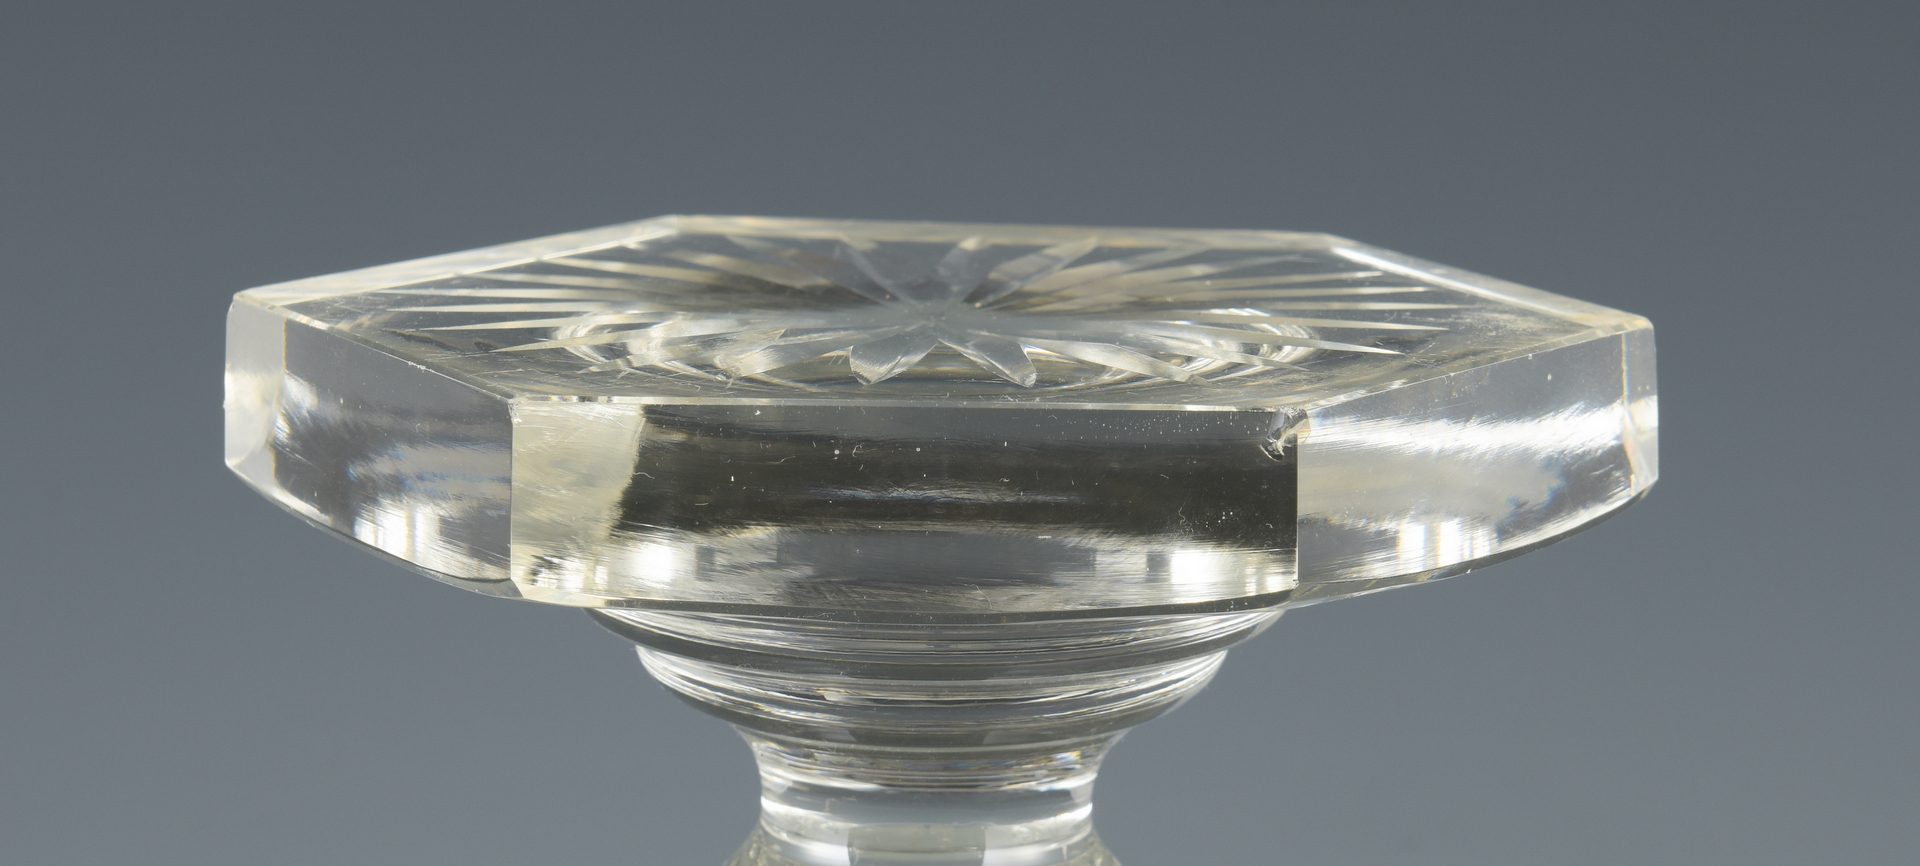 Lot 681: Pr. Anglo-Irish Crystal Sweetmeat Compotes